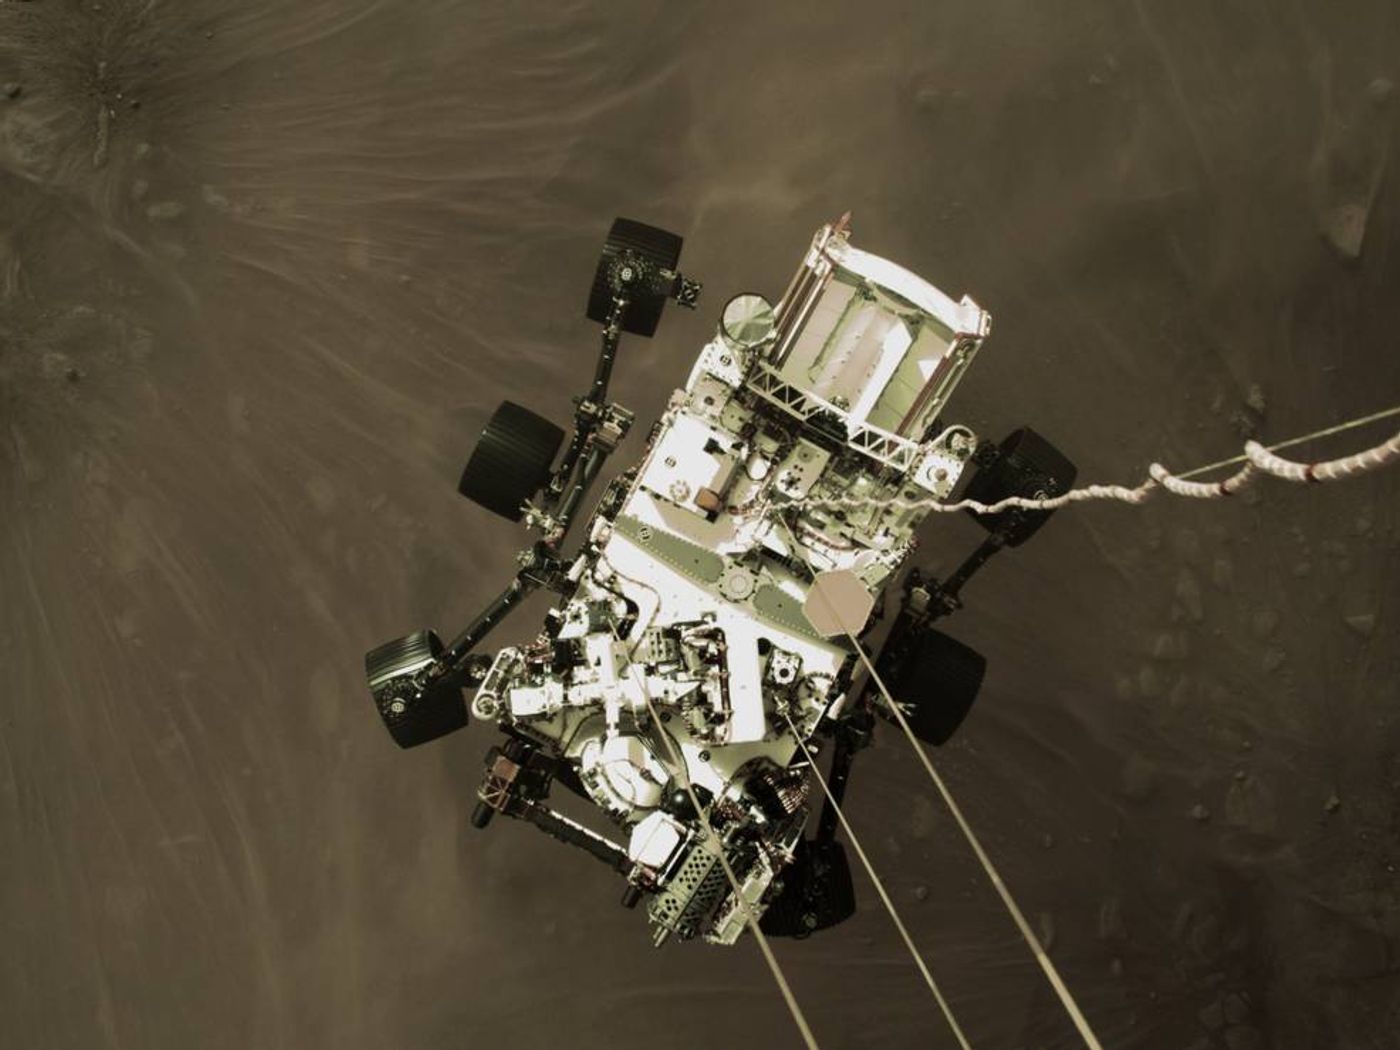 NASA's Perseverance Rover being lowered onto the Martian surface by its descent stage. Credit: NASA/JPL-Caltech